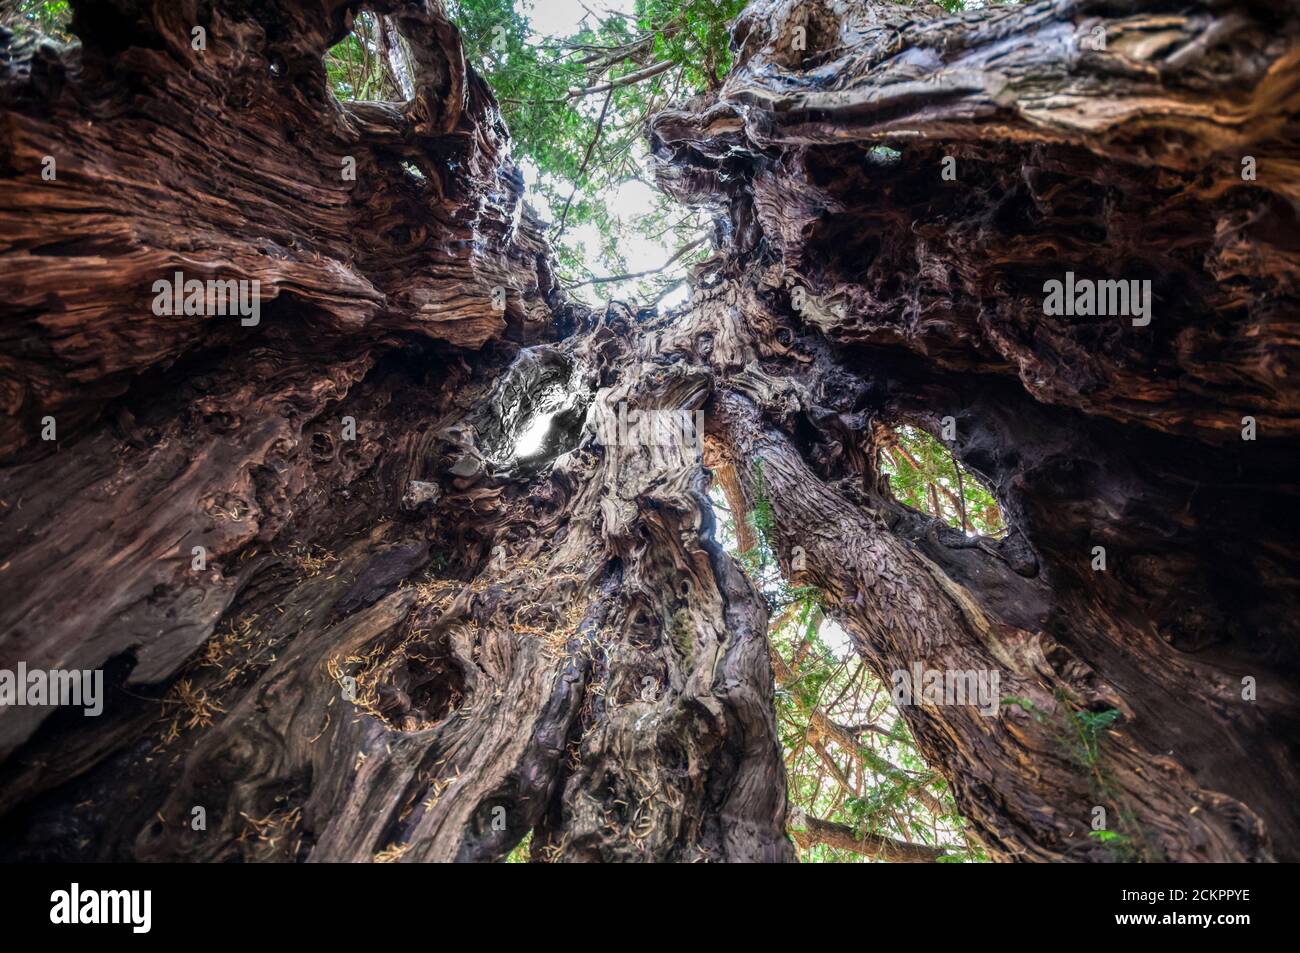 Looking up inside hollow trunk of Yew tree in the churchyard of St Mary's church in Downe, Kent. The yew is believed to be over 1700 years old. Stock Photo